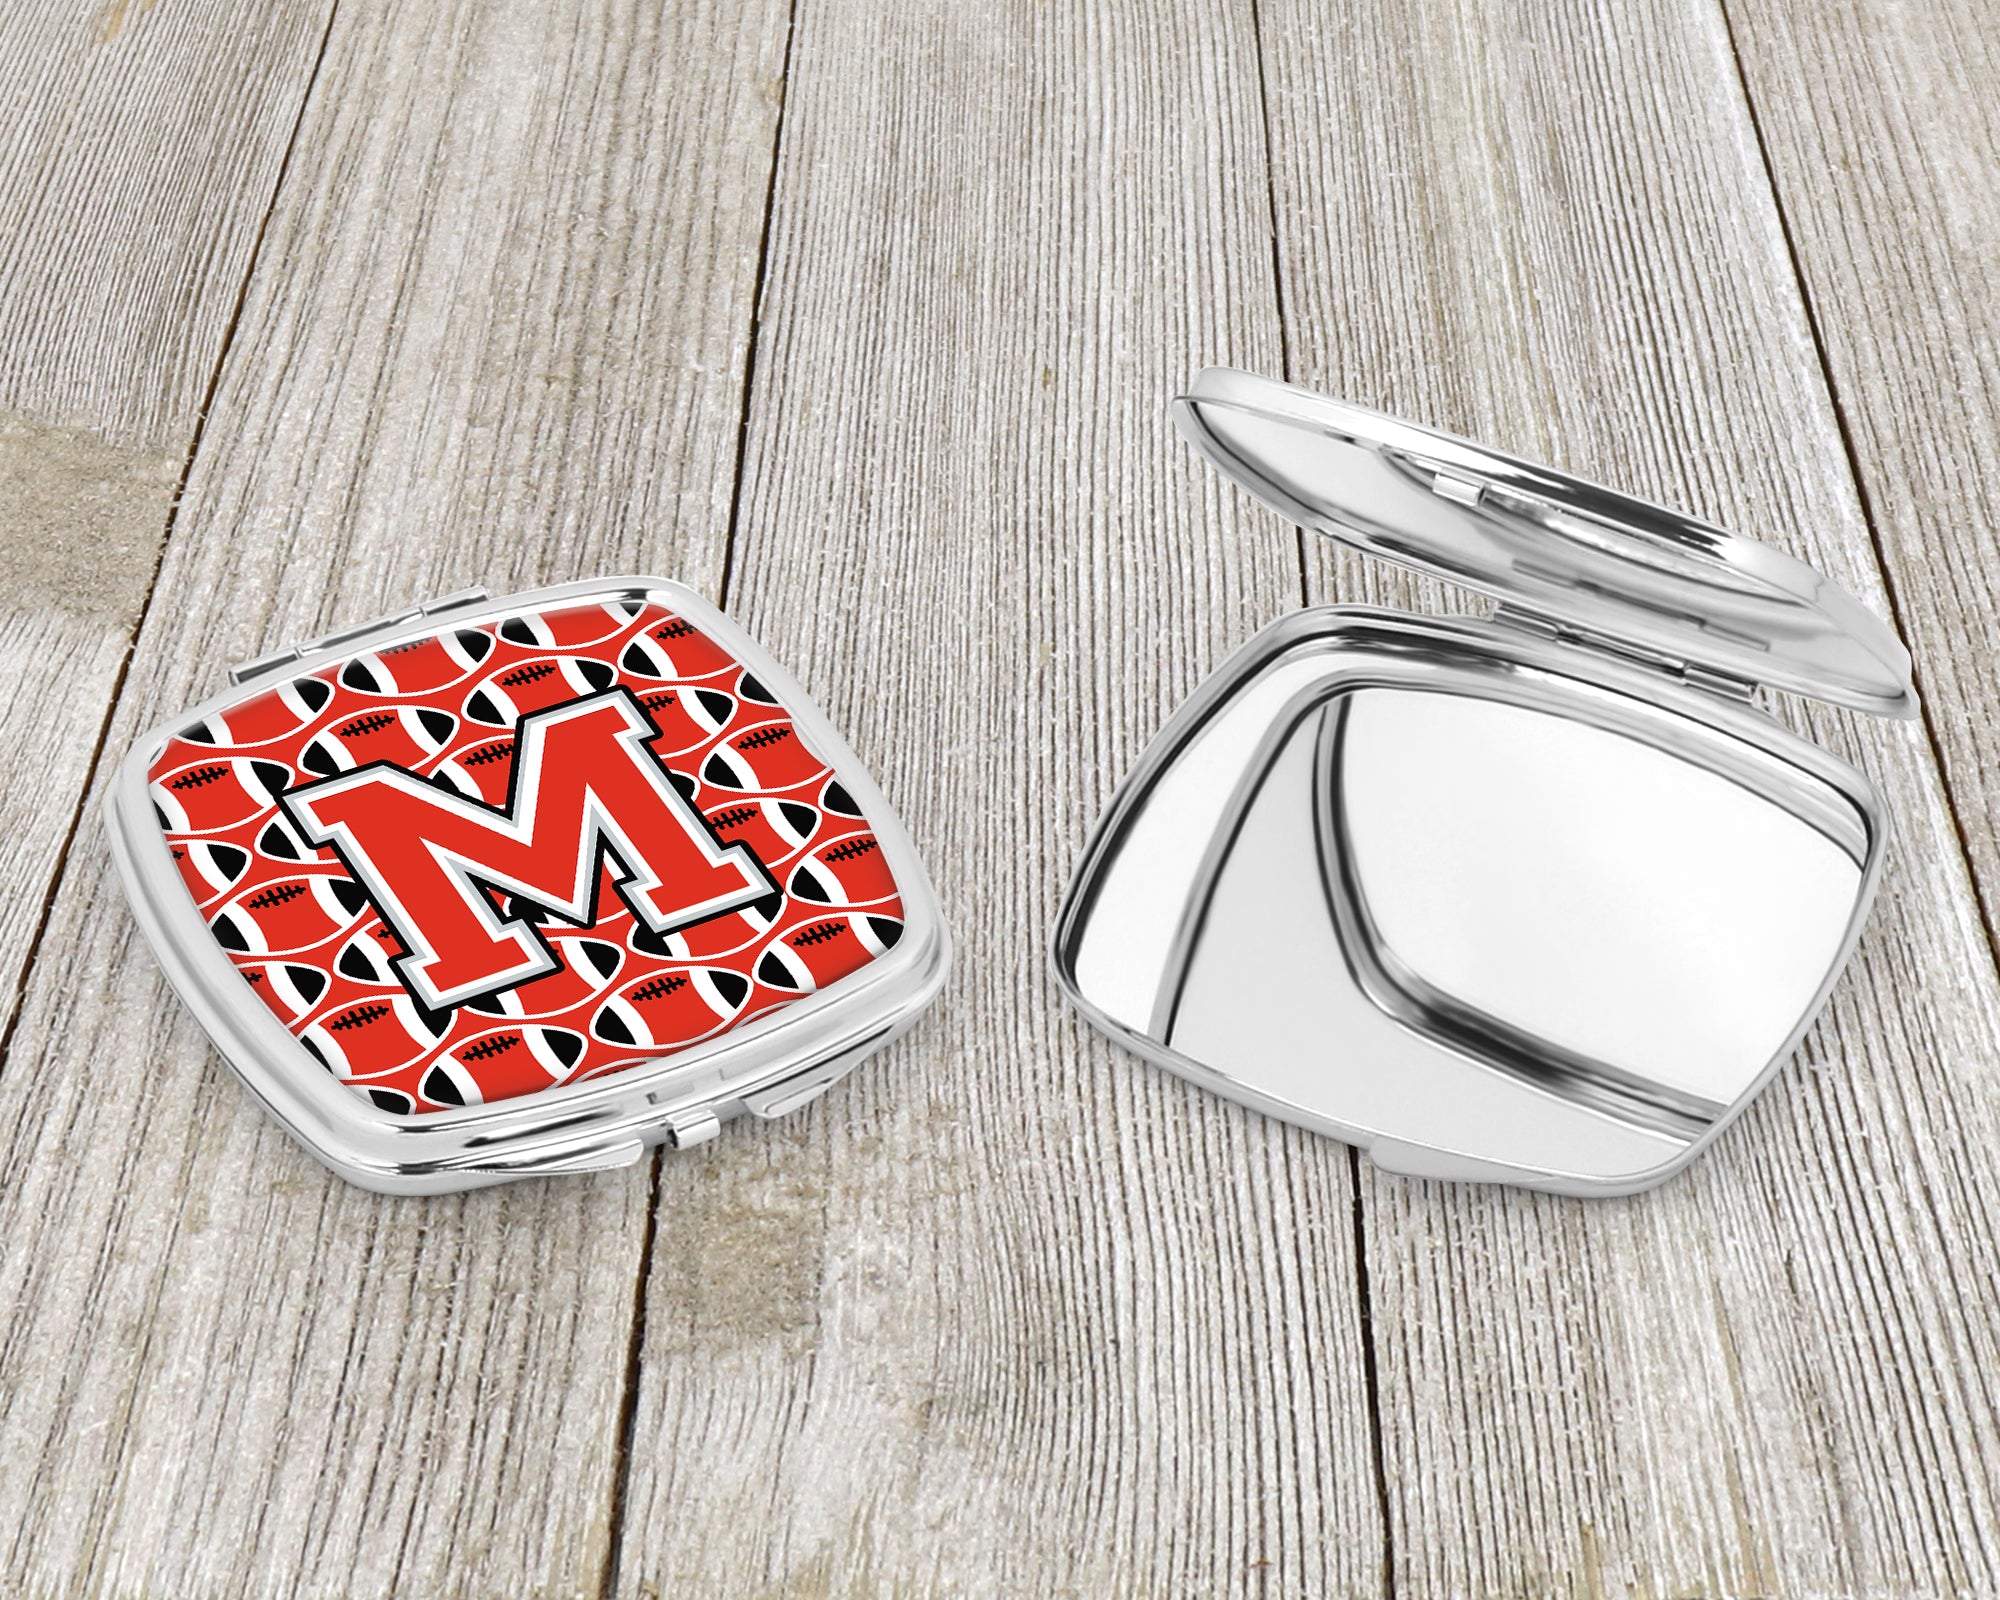 Letter M Football Scarlet and Grey Compact Mirror CJ1067-MSCM  the-store.com.